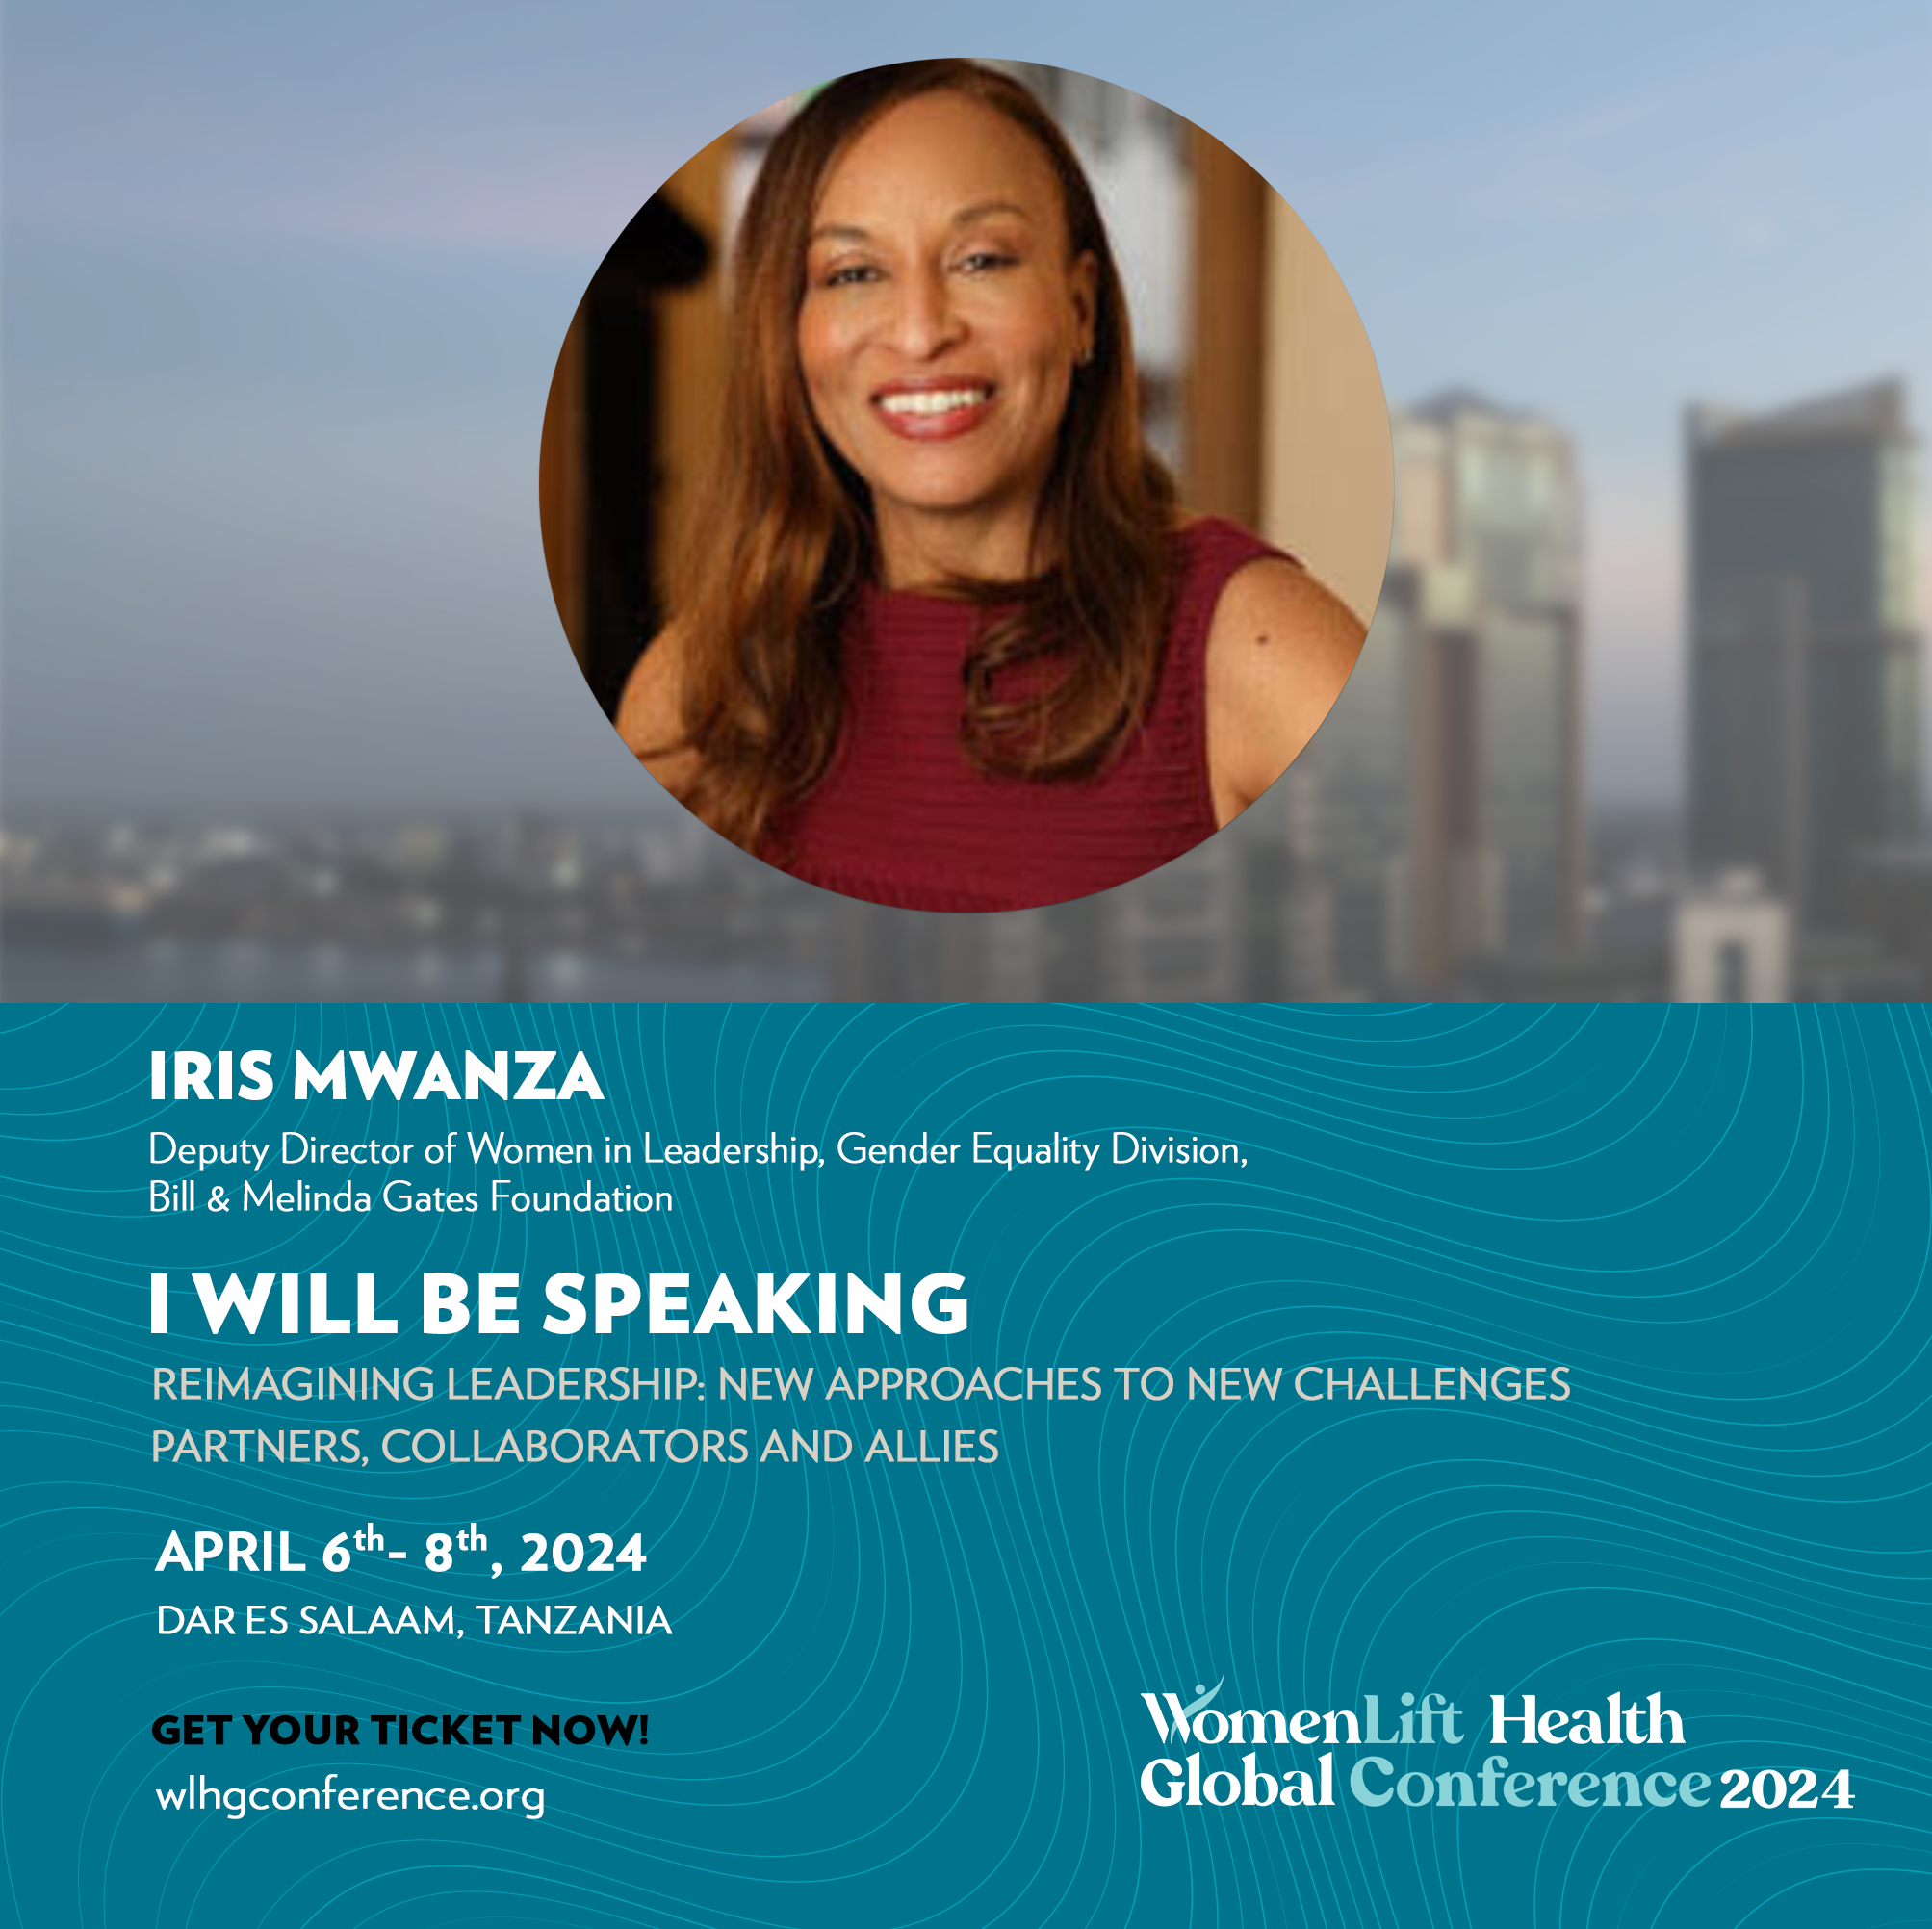 Iris Mwanza will be speaking at the WomenLift Health Global Conference 2024